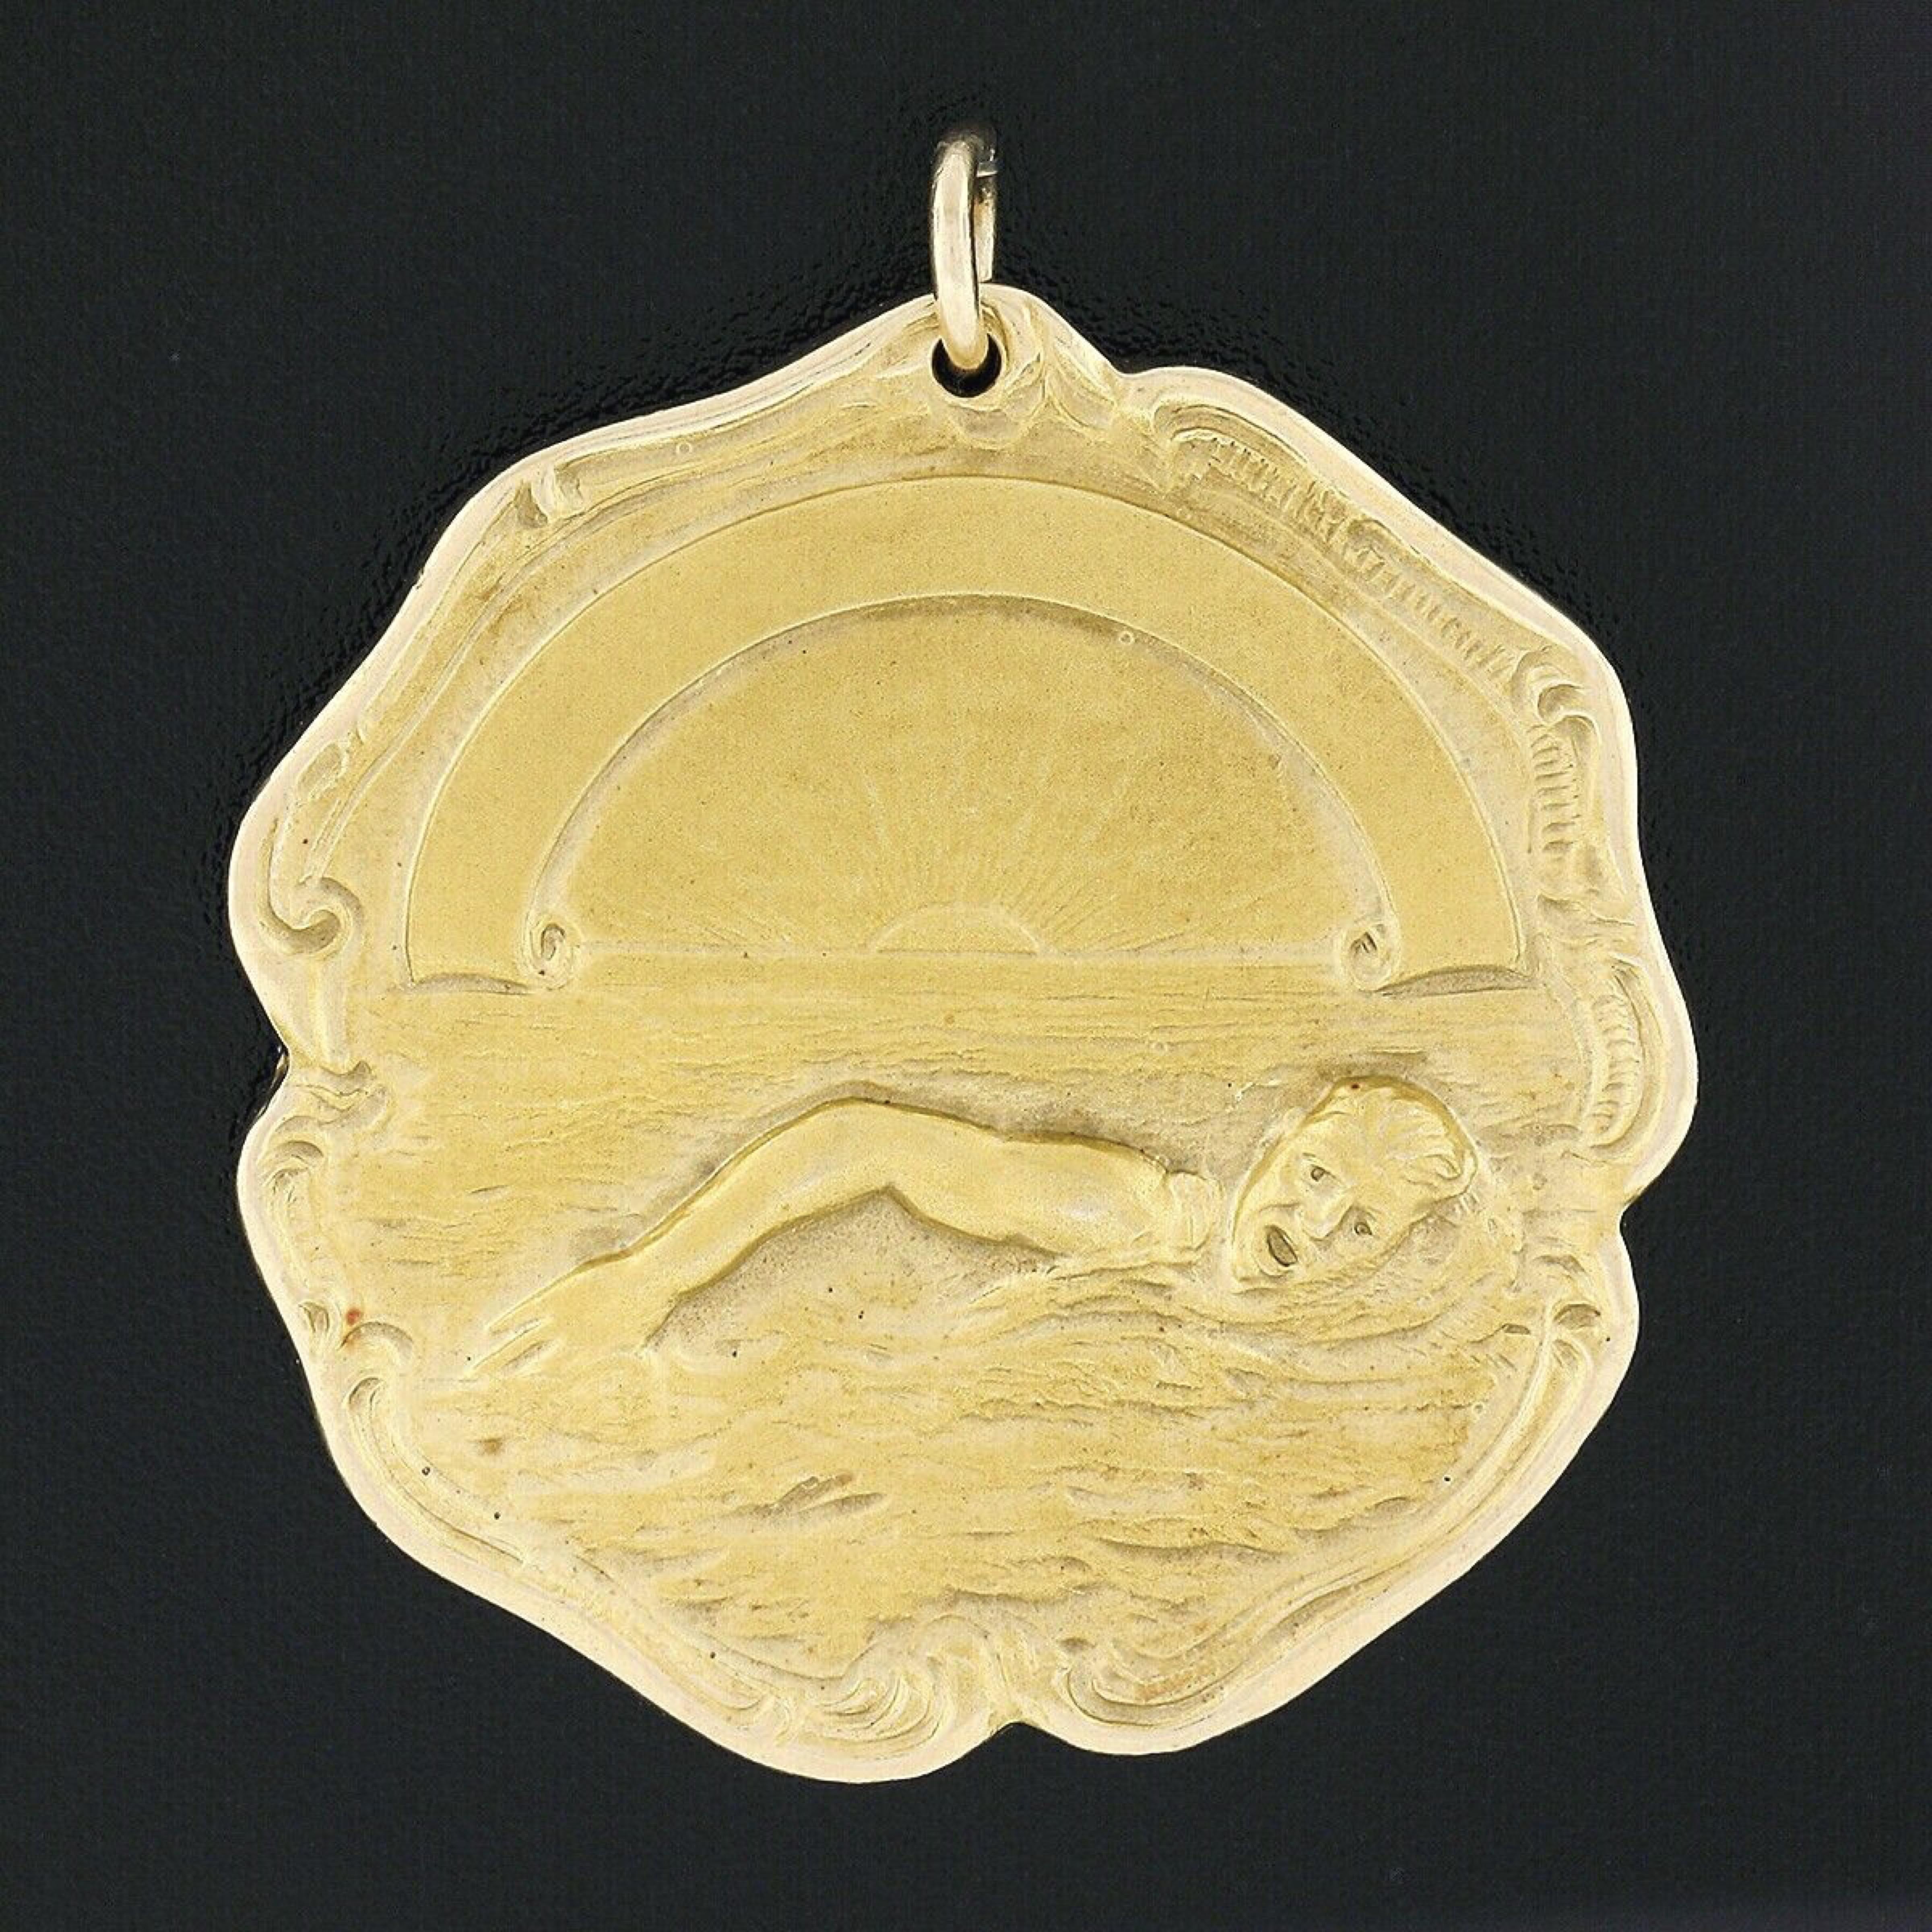 This magnificent and very well made antique medal medallion pendant is crafted in solid 14k yellow gold. It features a highly detailed scene of a man swimming at its front side with nice matte finish throughout. The back of the medal is neatly